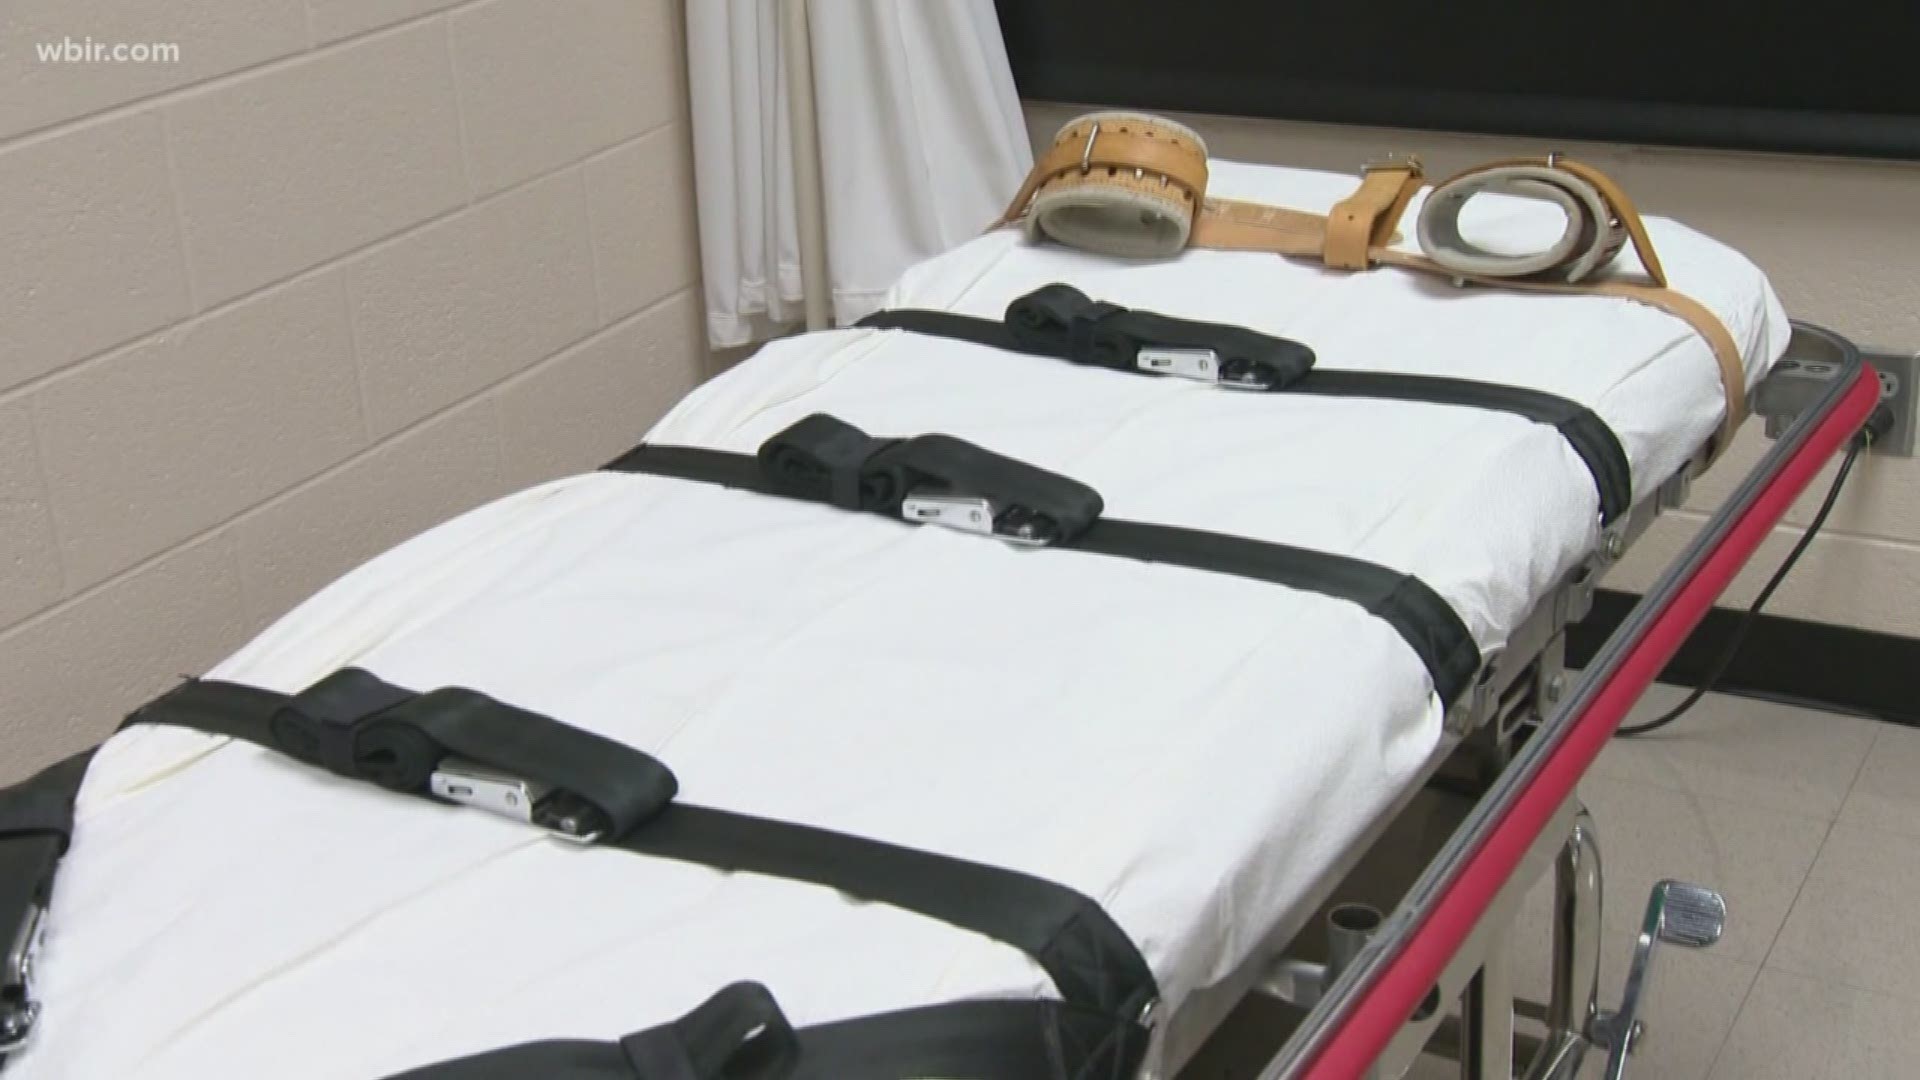 A new bill in Tennessee would ban the death penalty for people suffering from severe mental illness at the time of the crime.